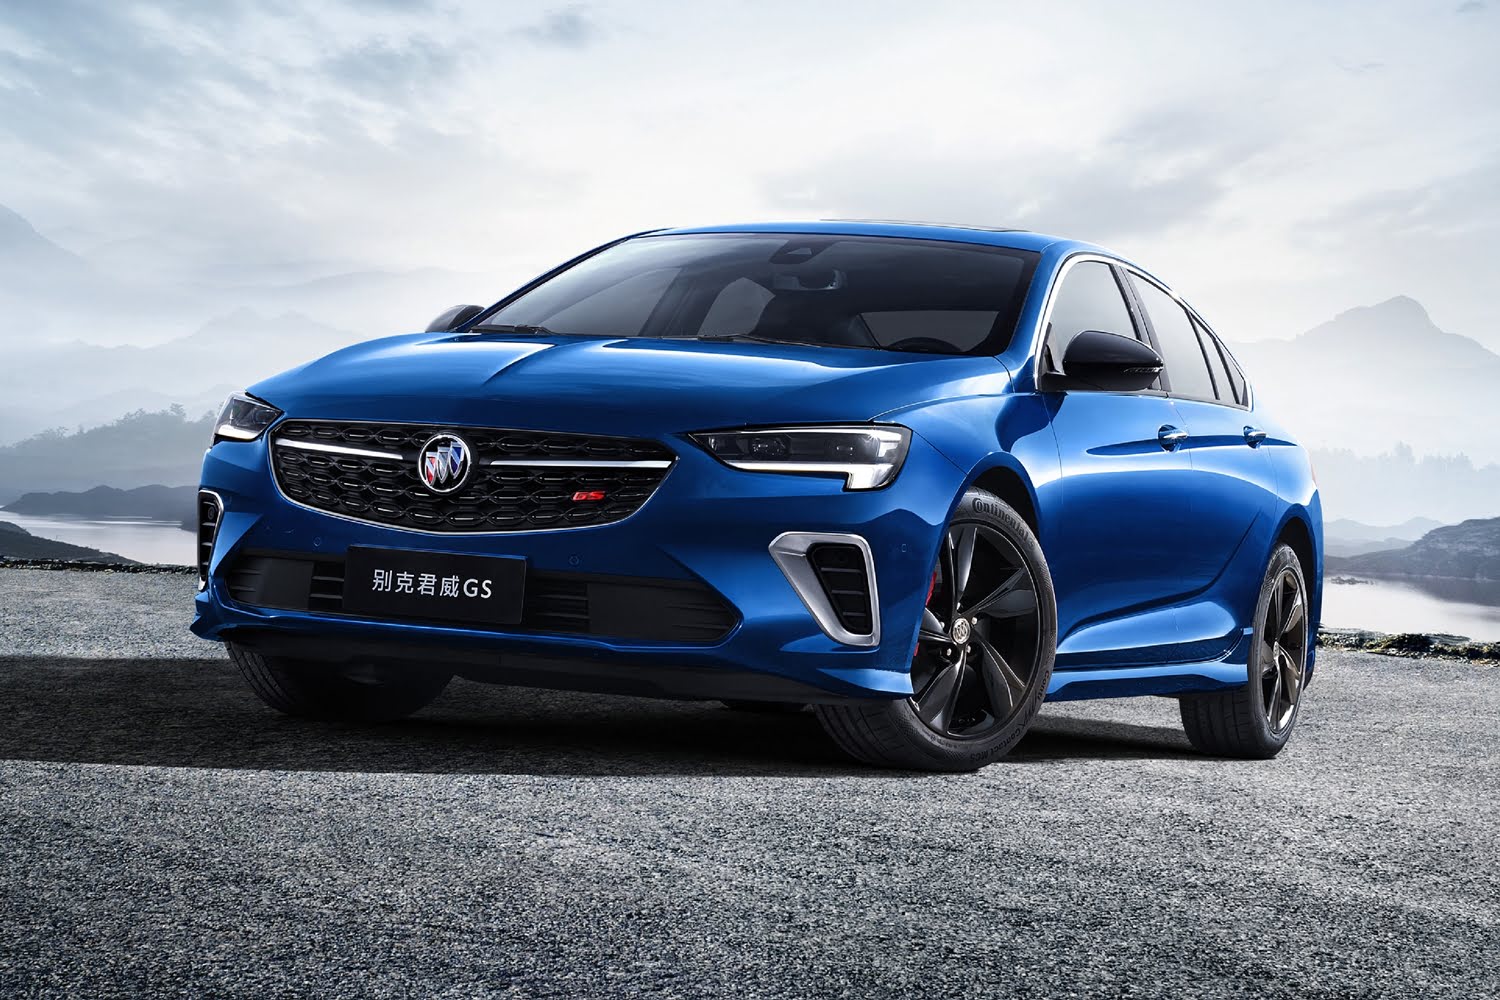 New 2022 Buick Regal GS Officially Launches In China